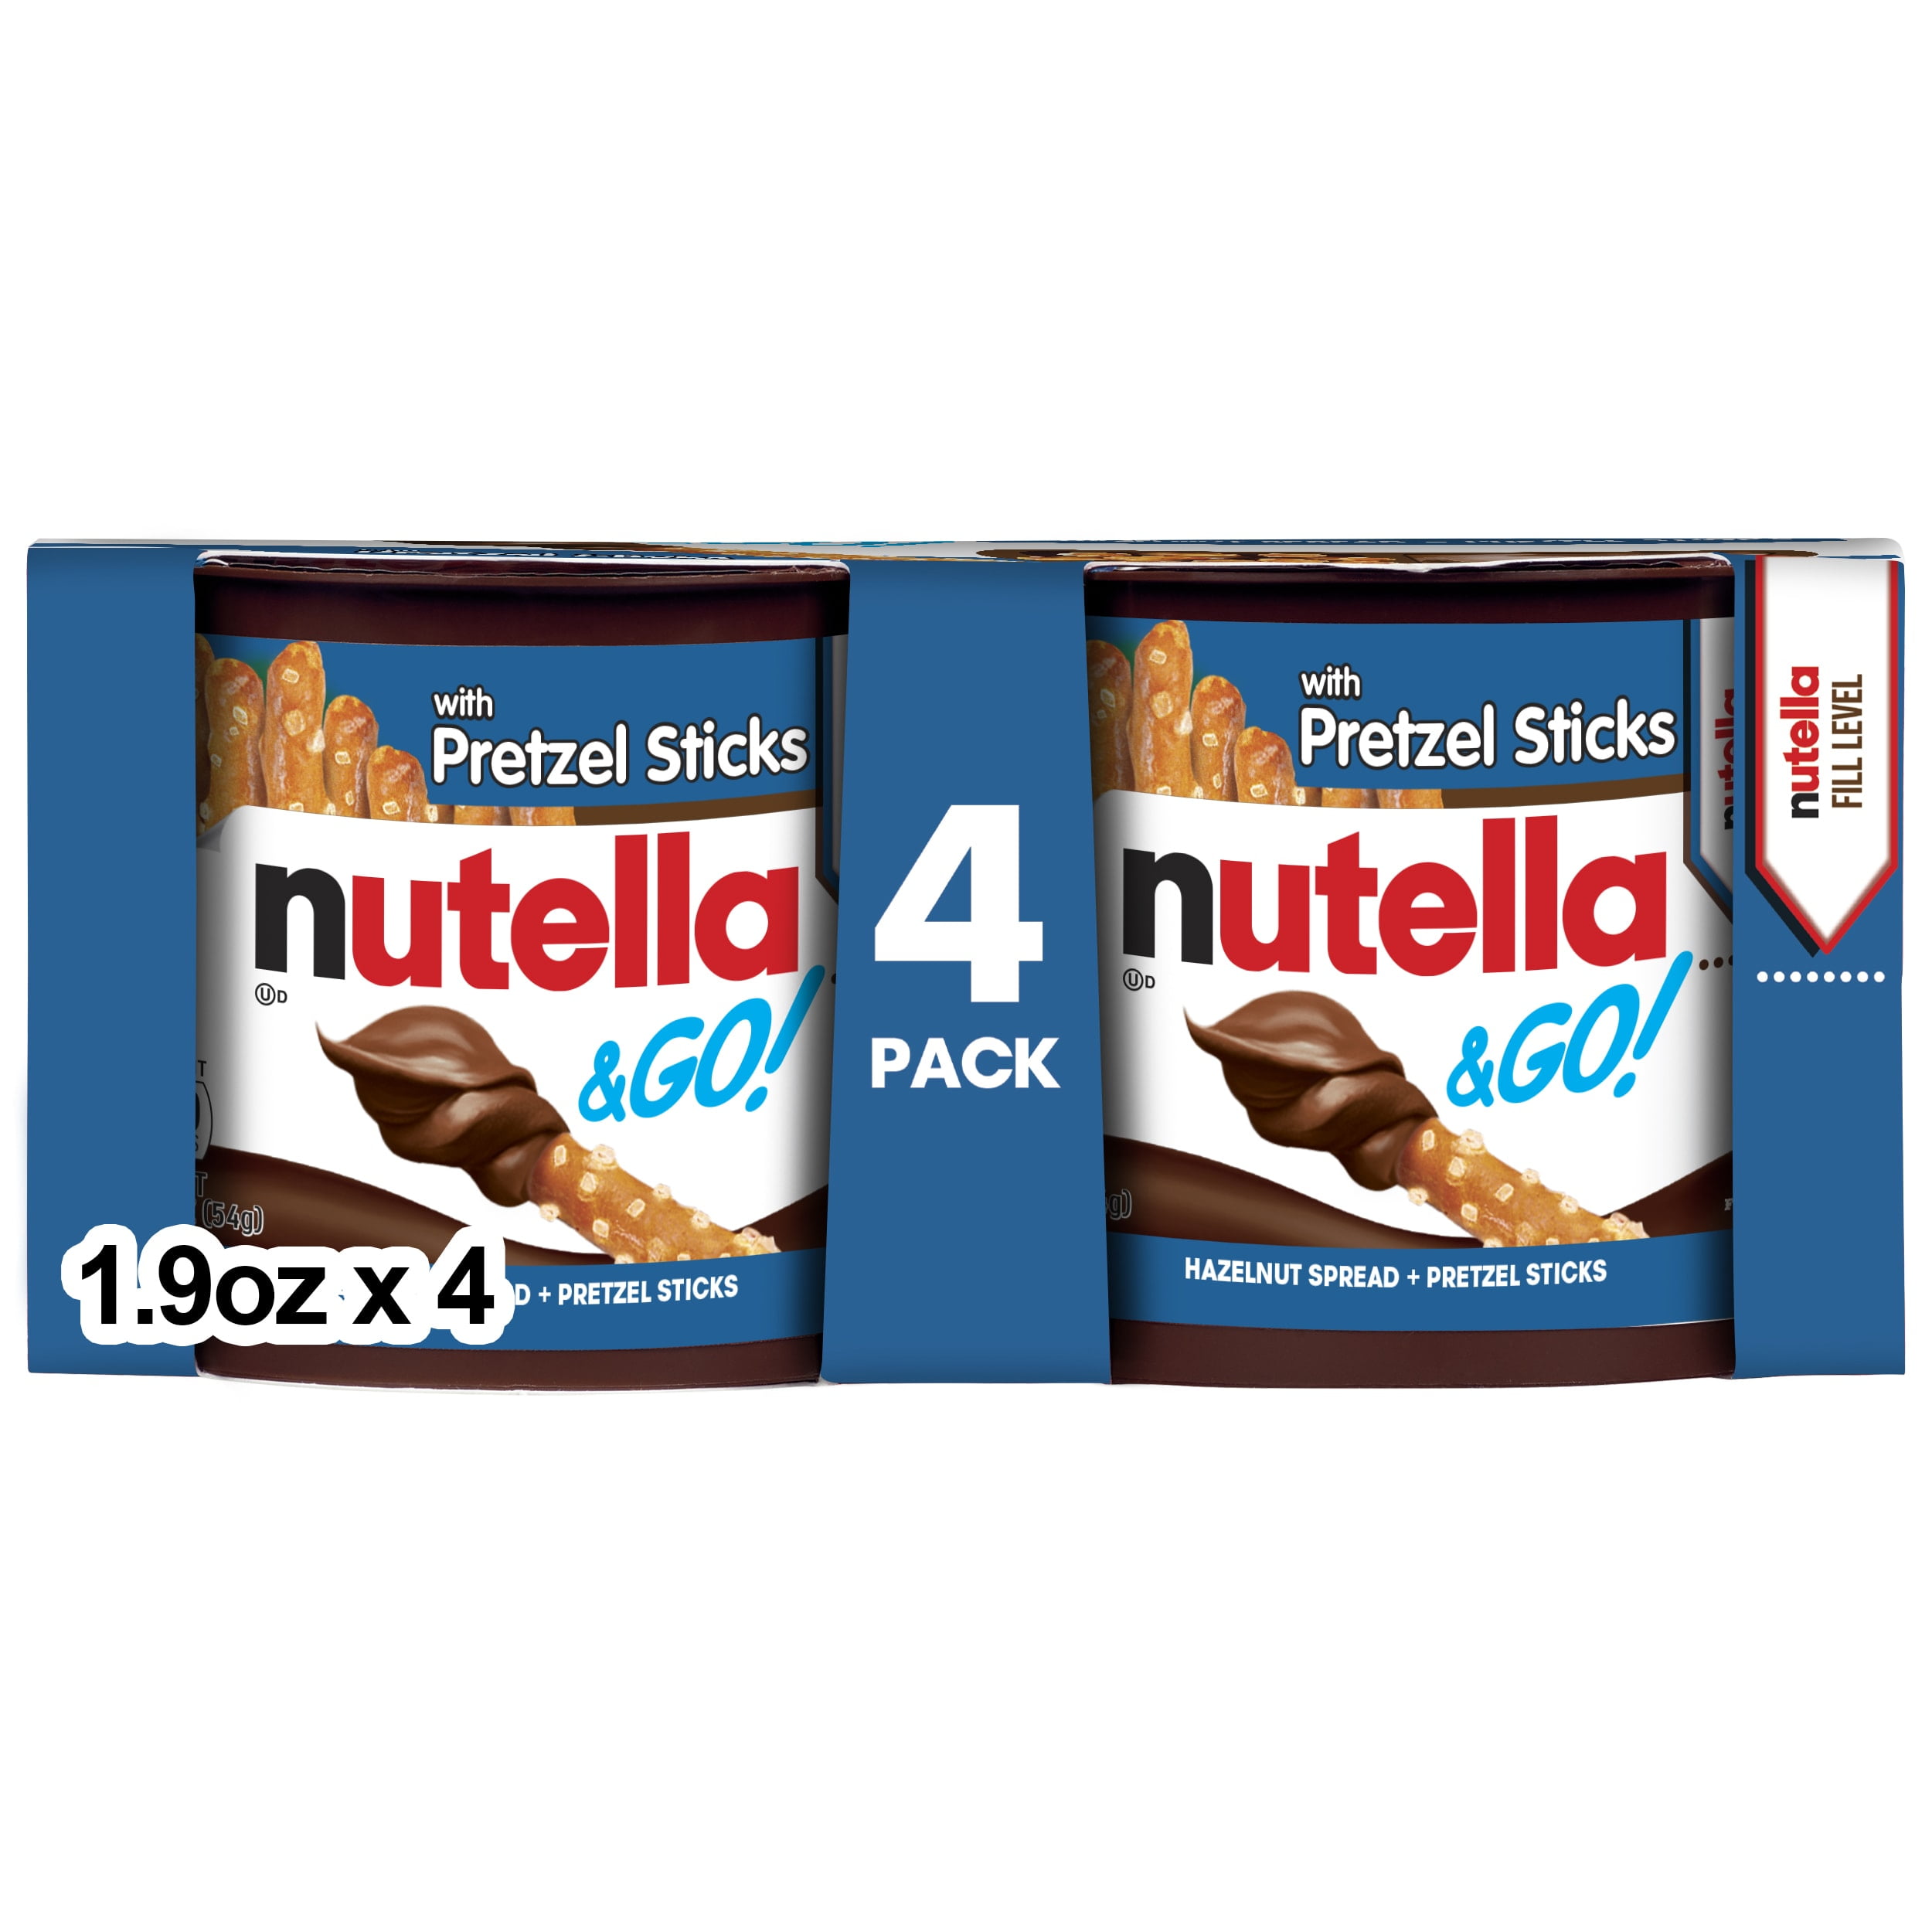 (4 Pack) Nutella & GO! Hazelnut And Cocoa Spread With Pretzel Sticks, Snack Pack, Easter Basket Stuffers, 1.9 oz